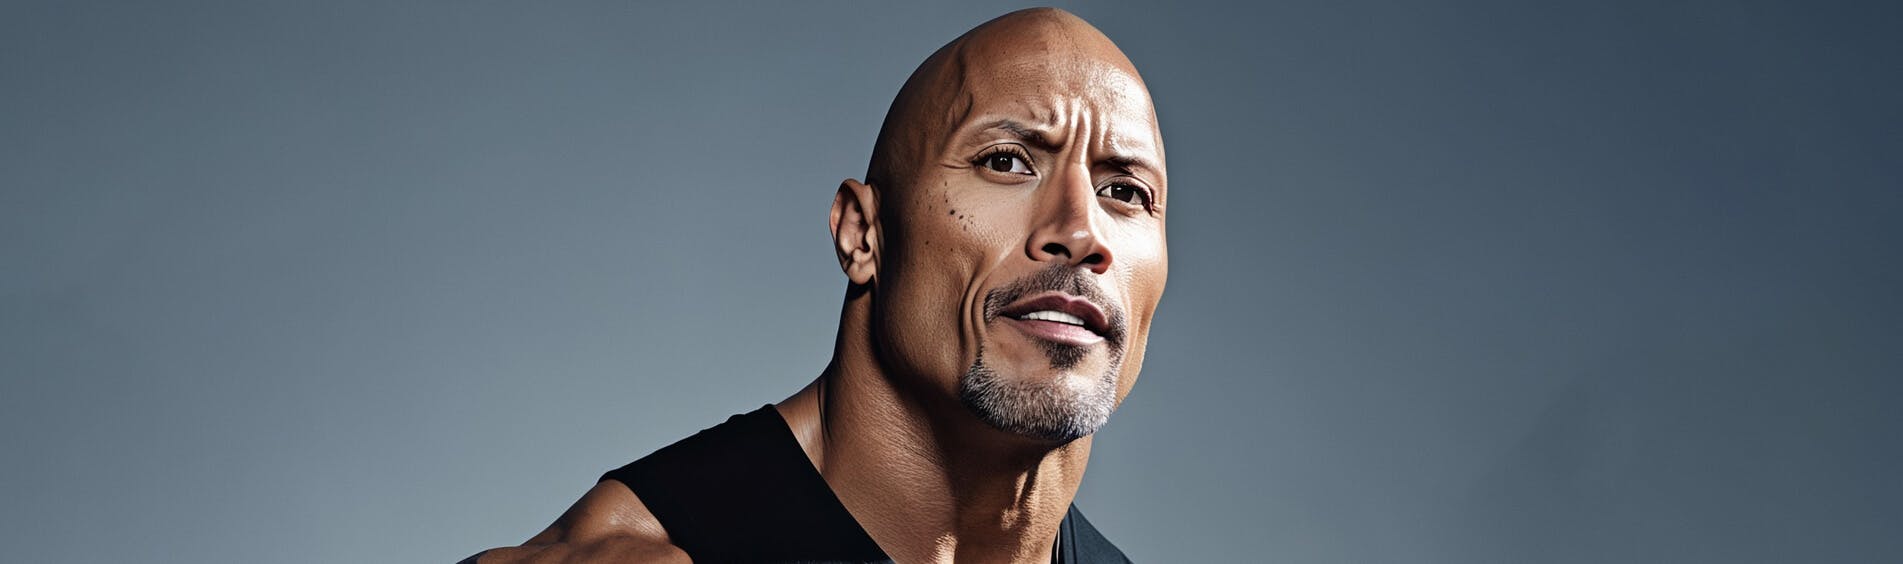 Cover Image for “The Rock” Is Back In The Ring